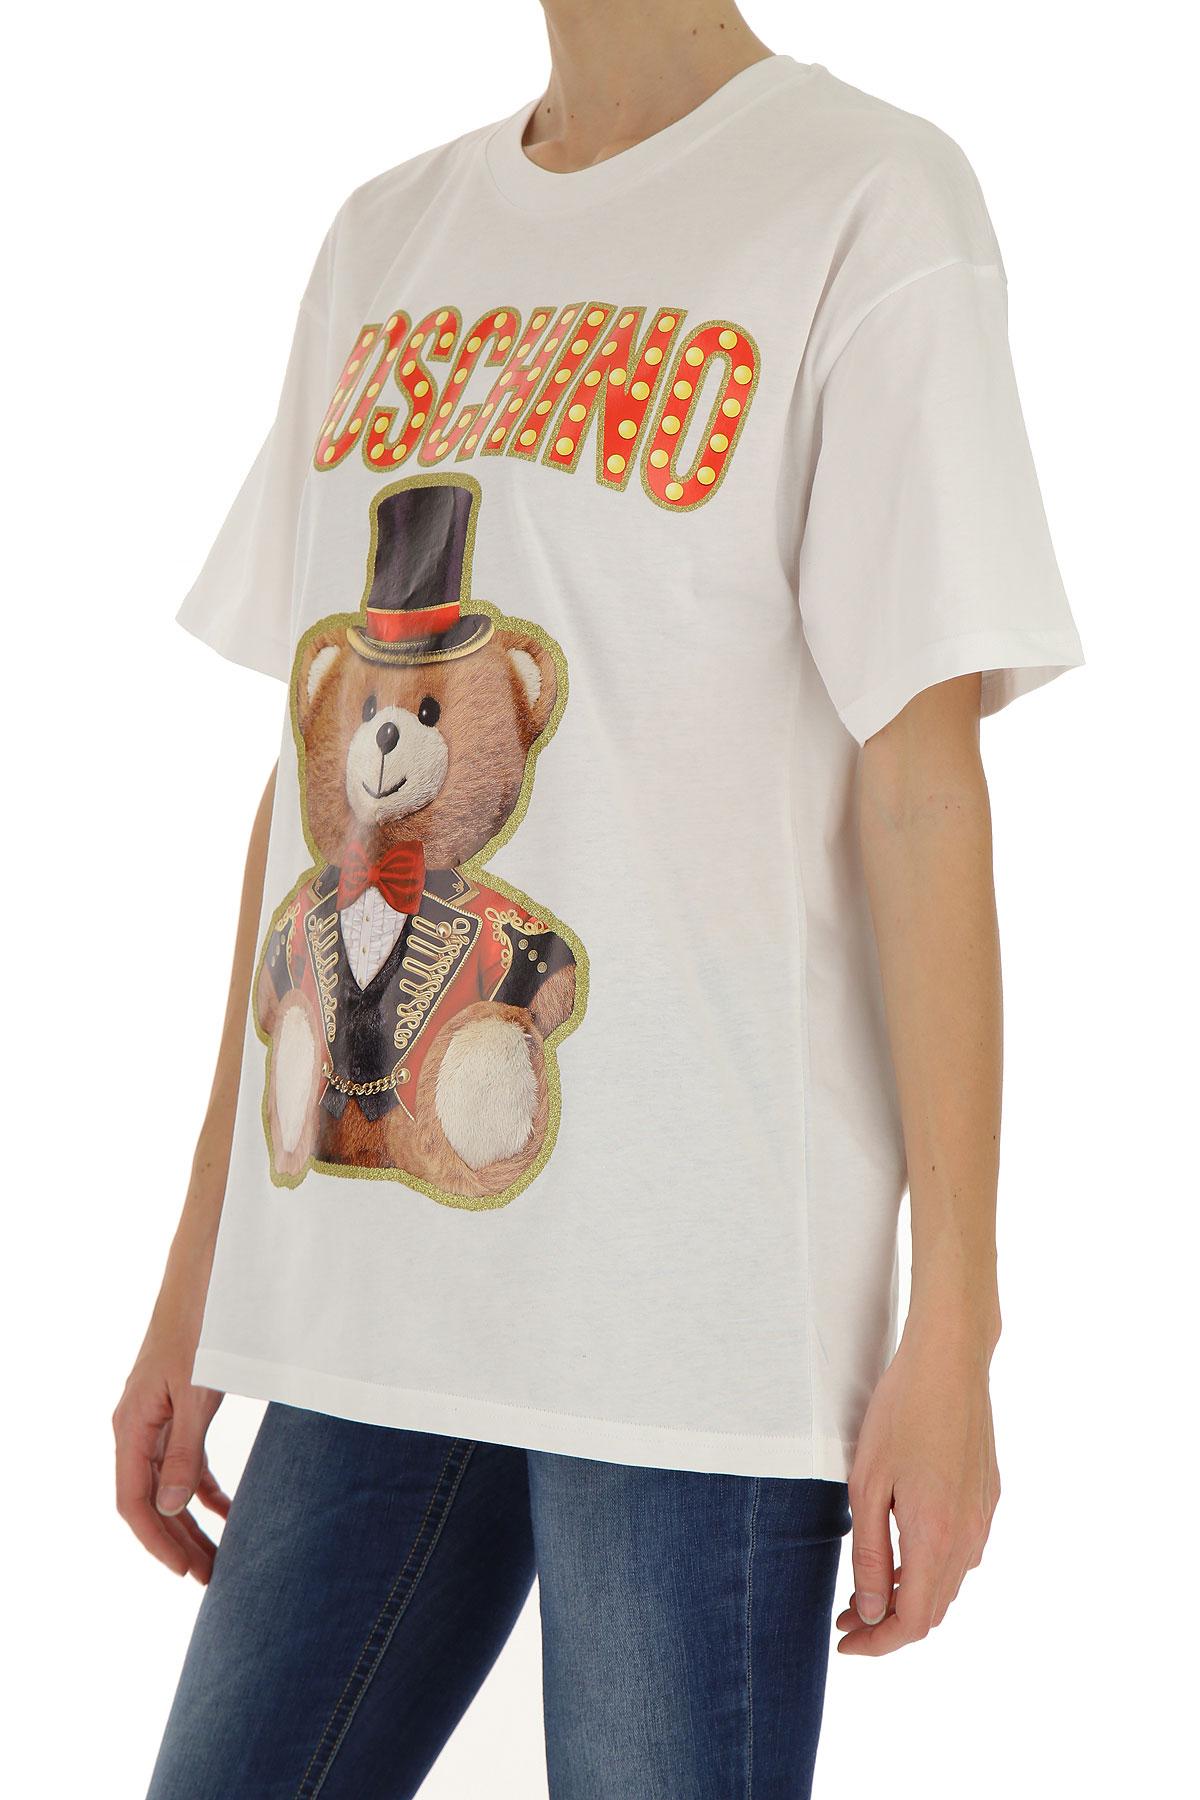 Moschino T-shirt For Women On Sale in White - Lyst